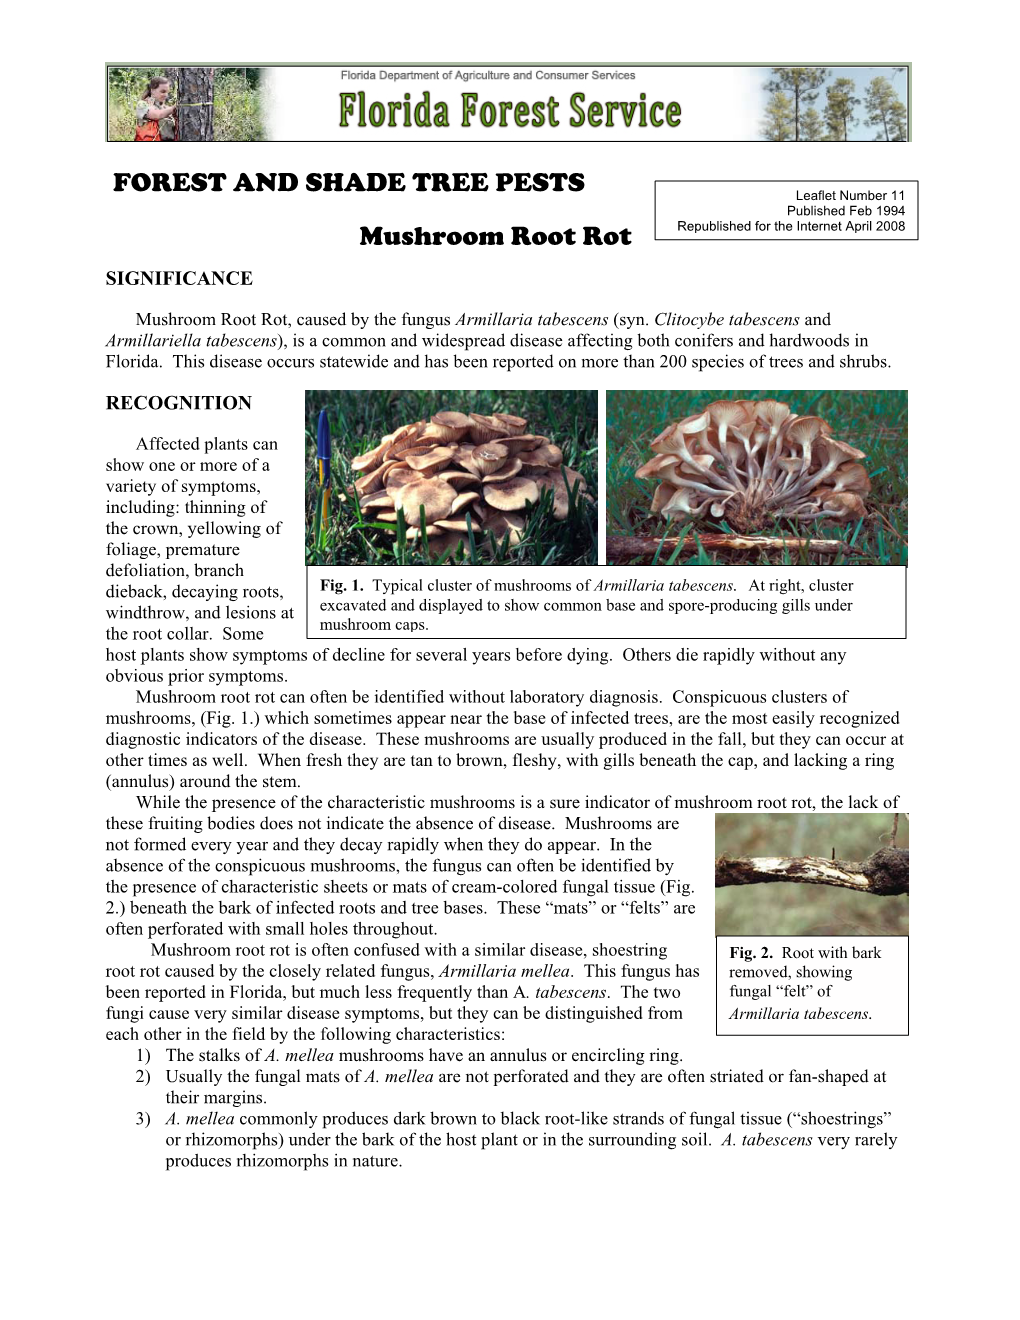 Mushroom Root Rot Republished for the Internet April 2008